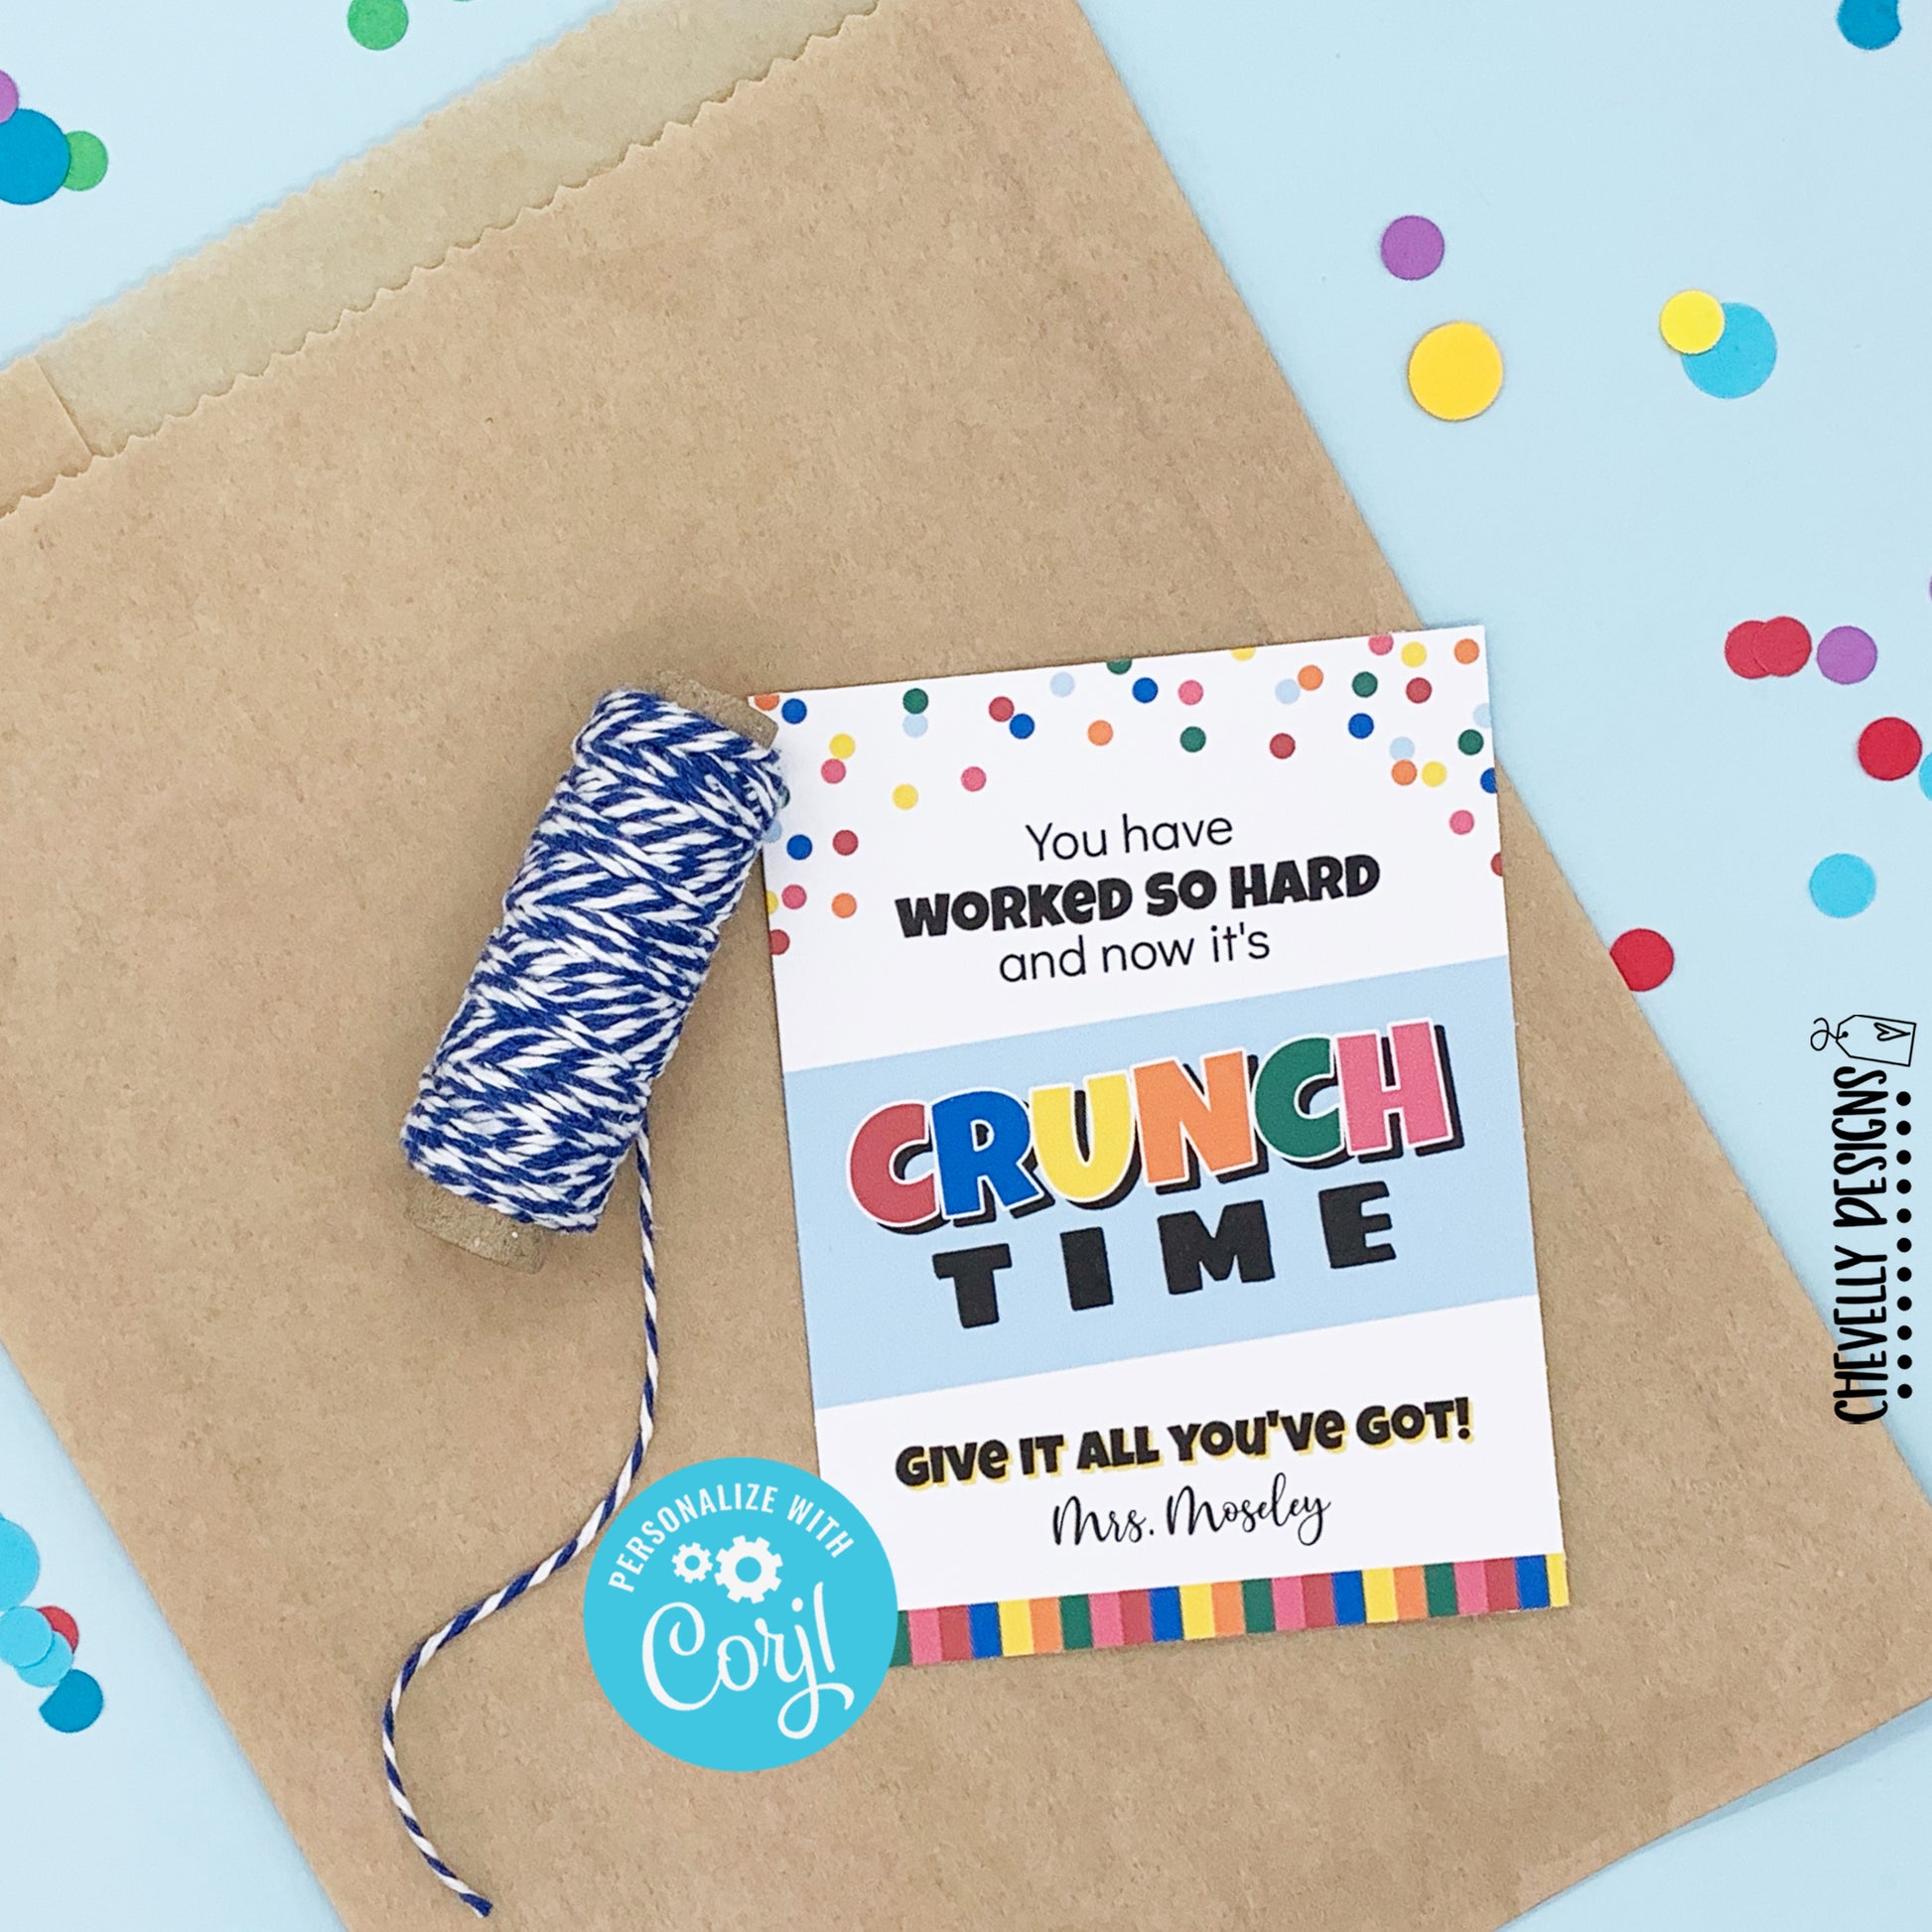 EDITABLE - Happy New Year Gift Tags - Printable Digital File – Chevelly  Designs